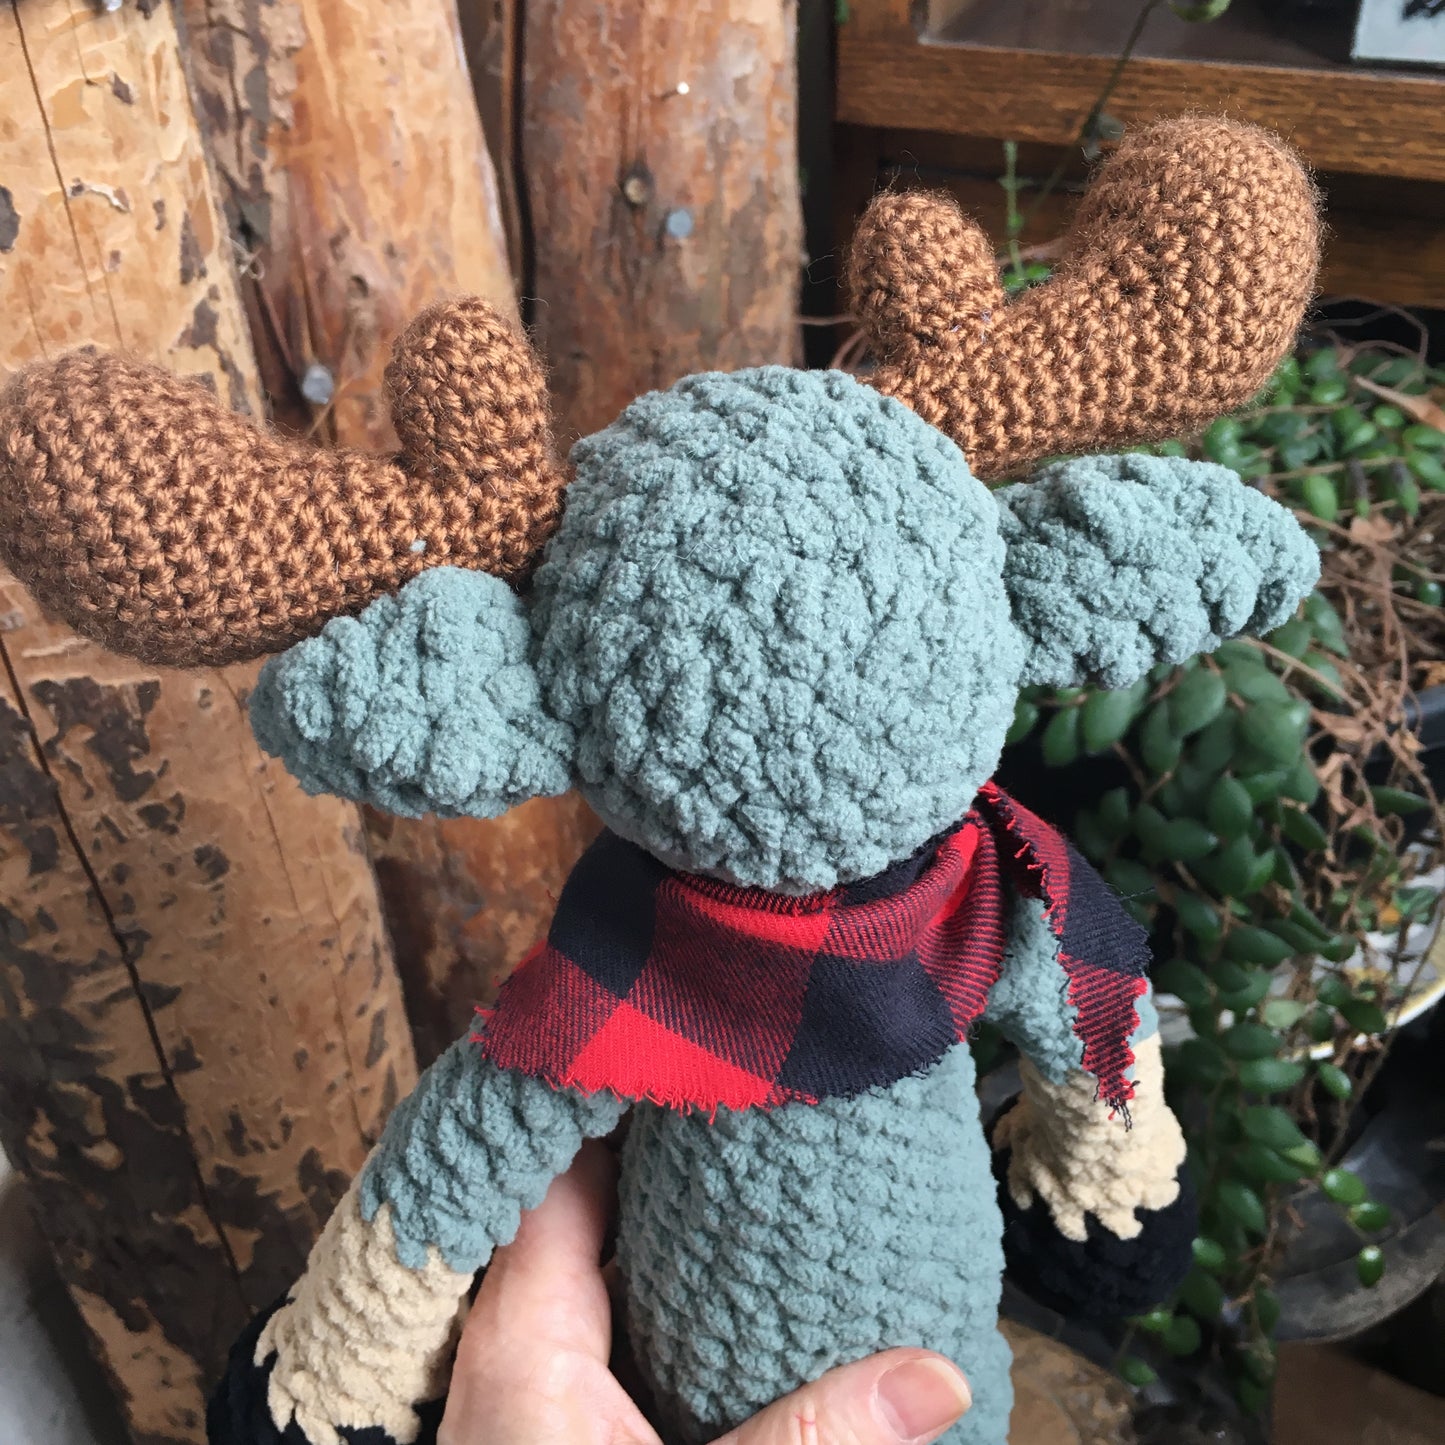 Jack the MOOMOOSE (NONORIGNAL) smoked green color, with safe eyes, lumberjack style moose soft toy, Can be personalized in BIRTH plushies